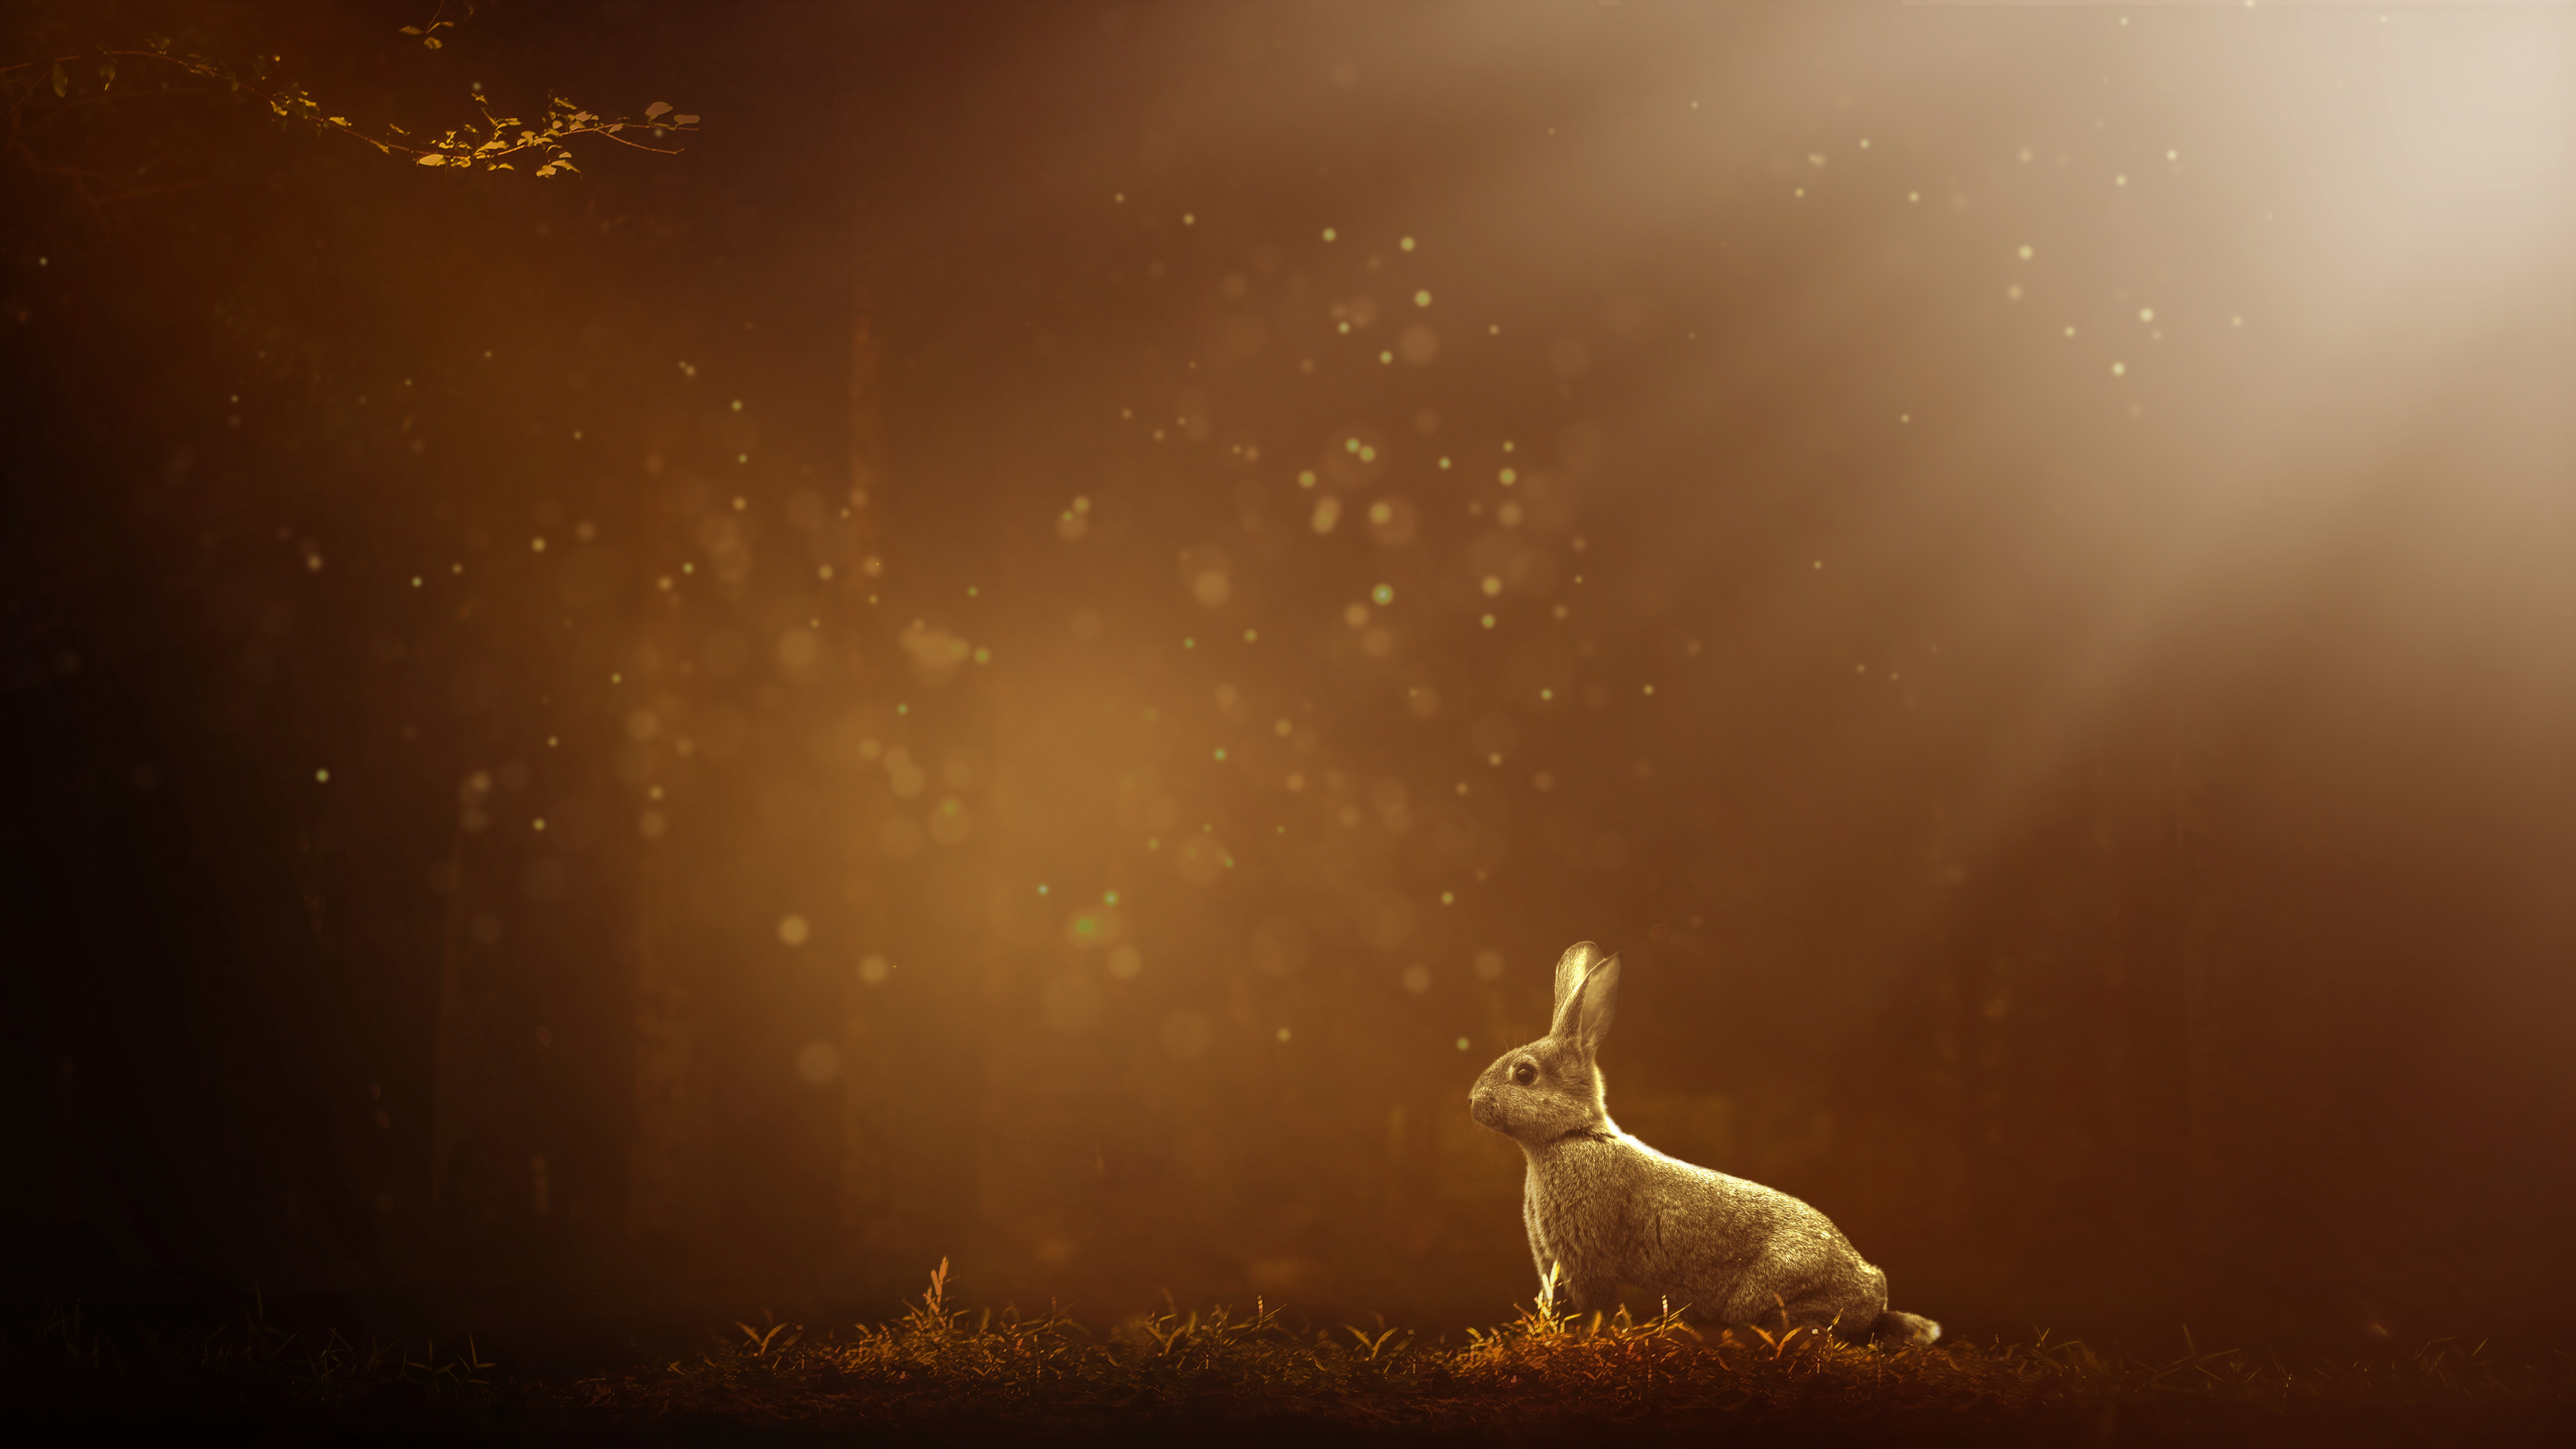 White Rabbit on Brown Grass Field During Night Time. Wallpaper in 3840x2160 Resolution